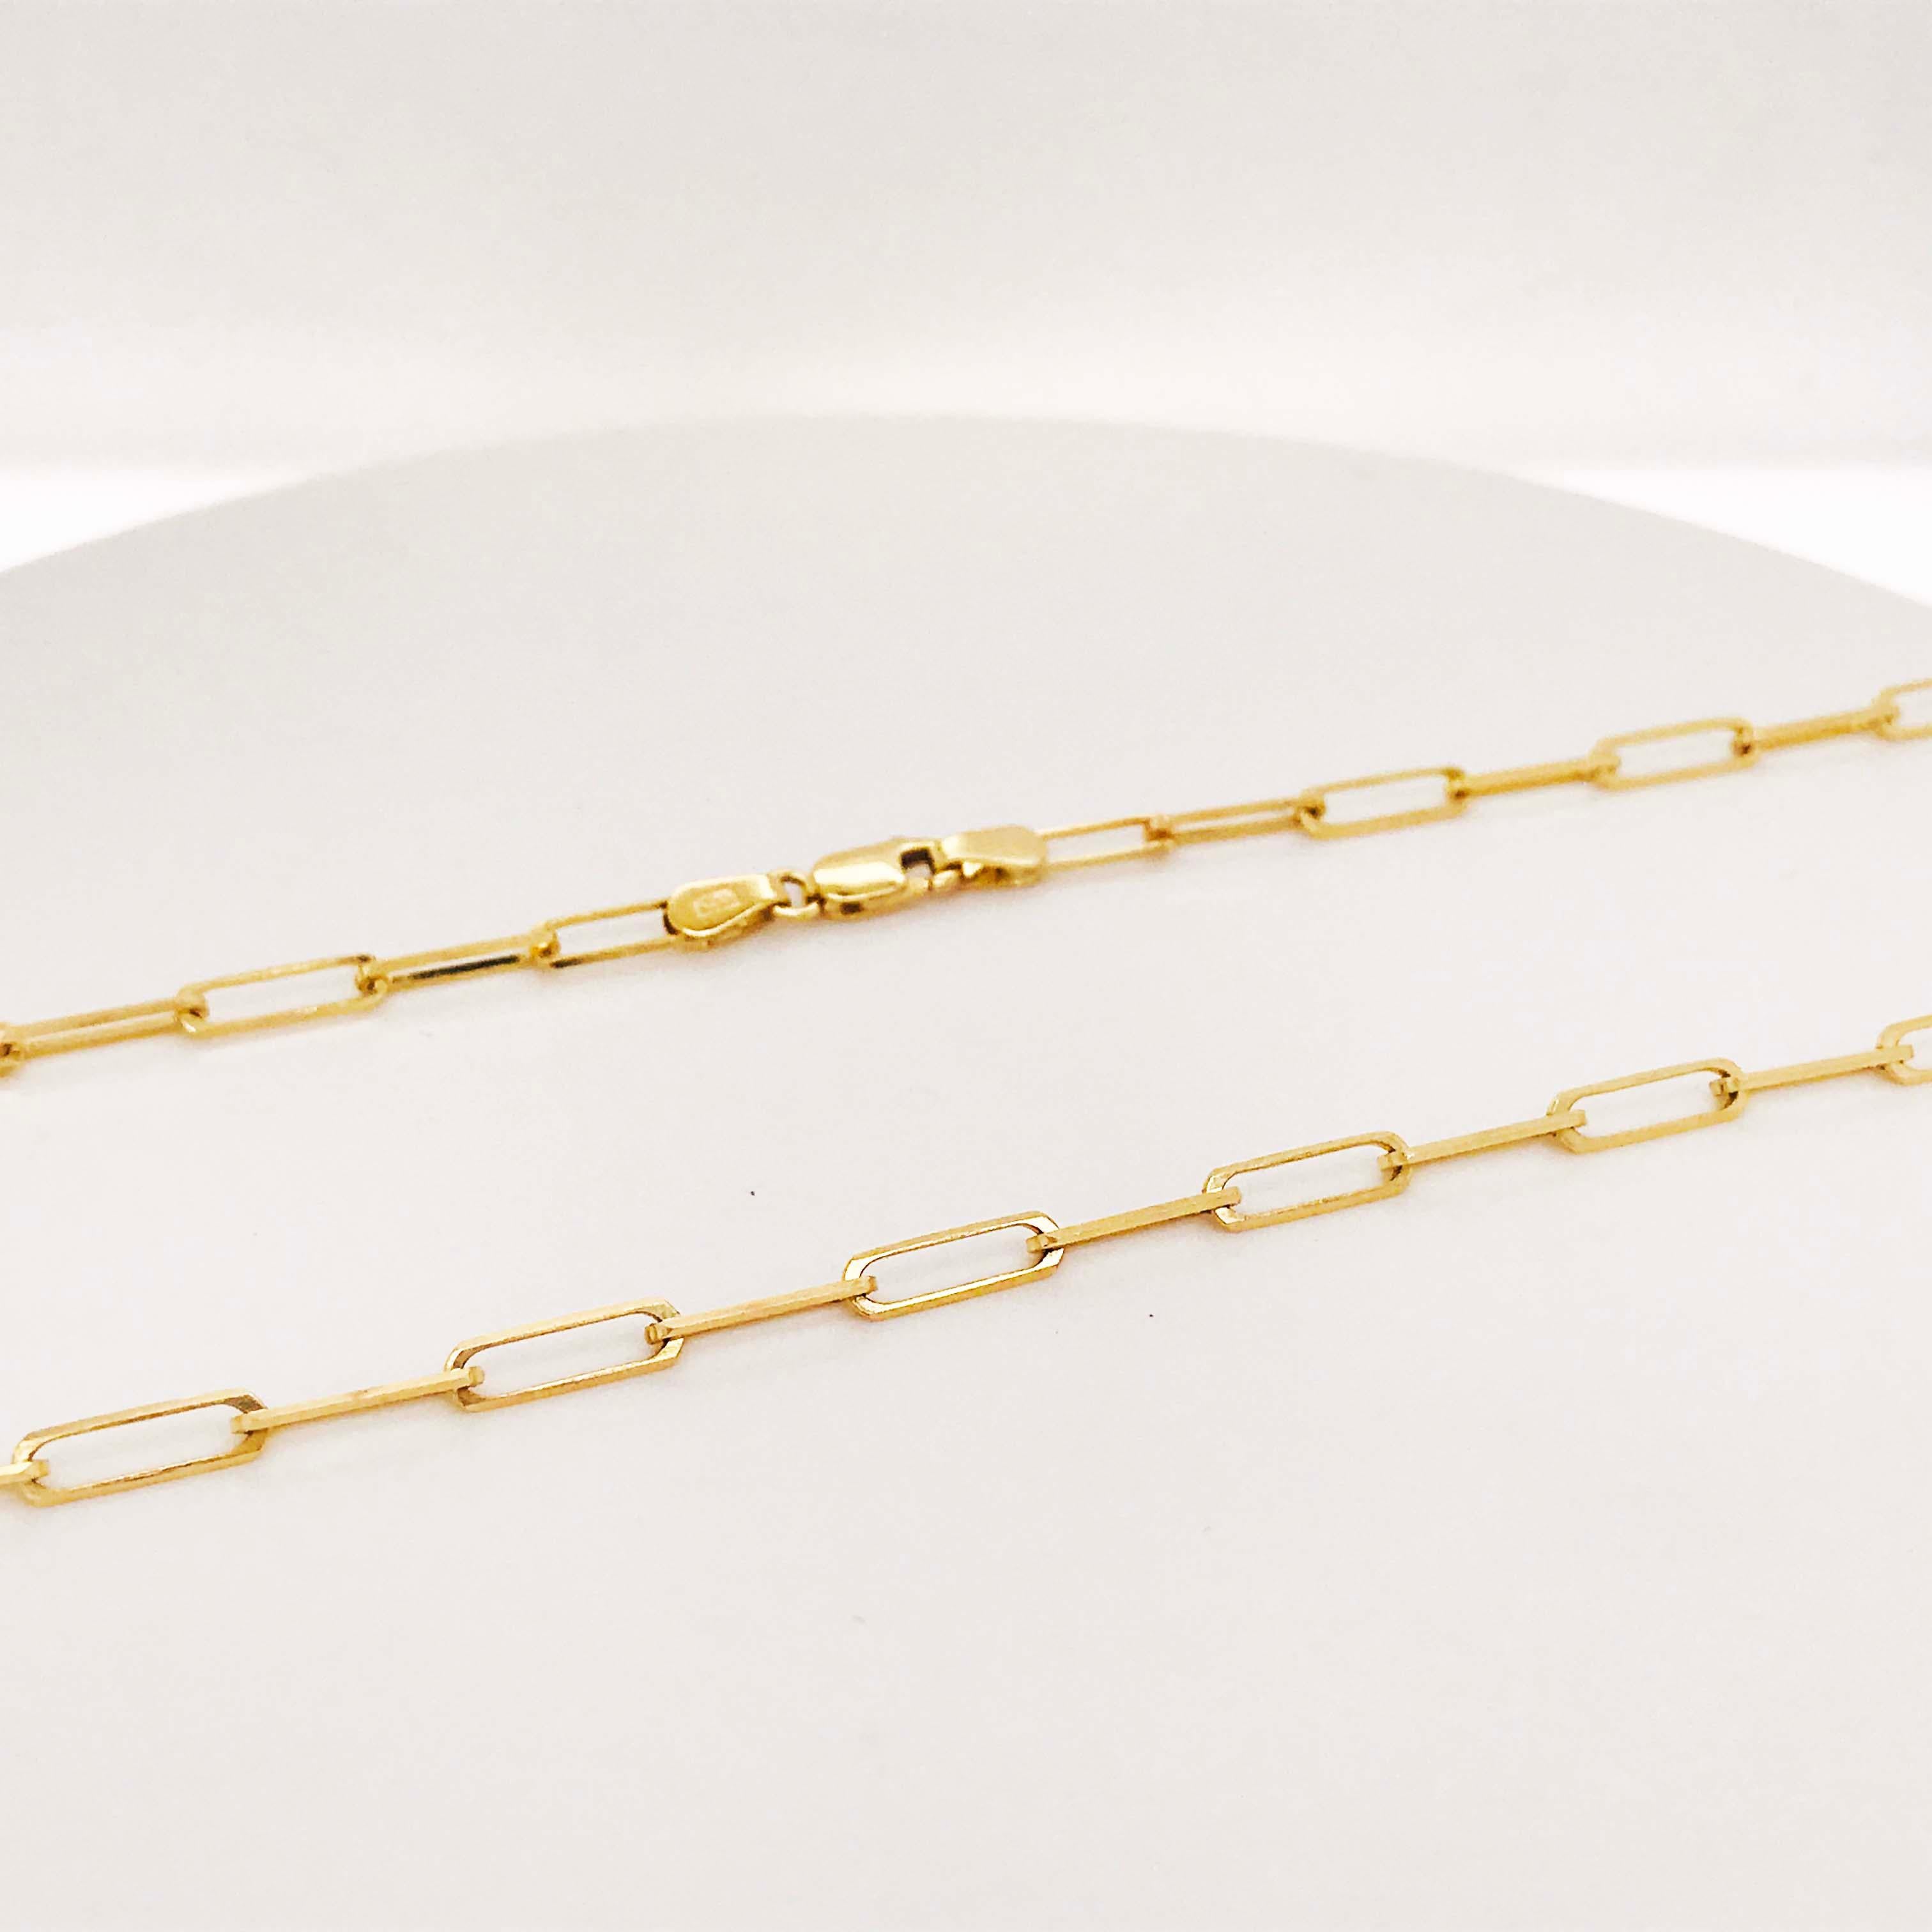 Paperclip Link Chain Necklace in 14 Karat Yellow Gold, 14 Karat Paperclip 5